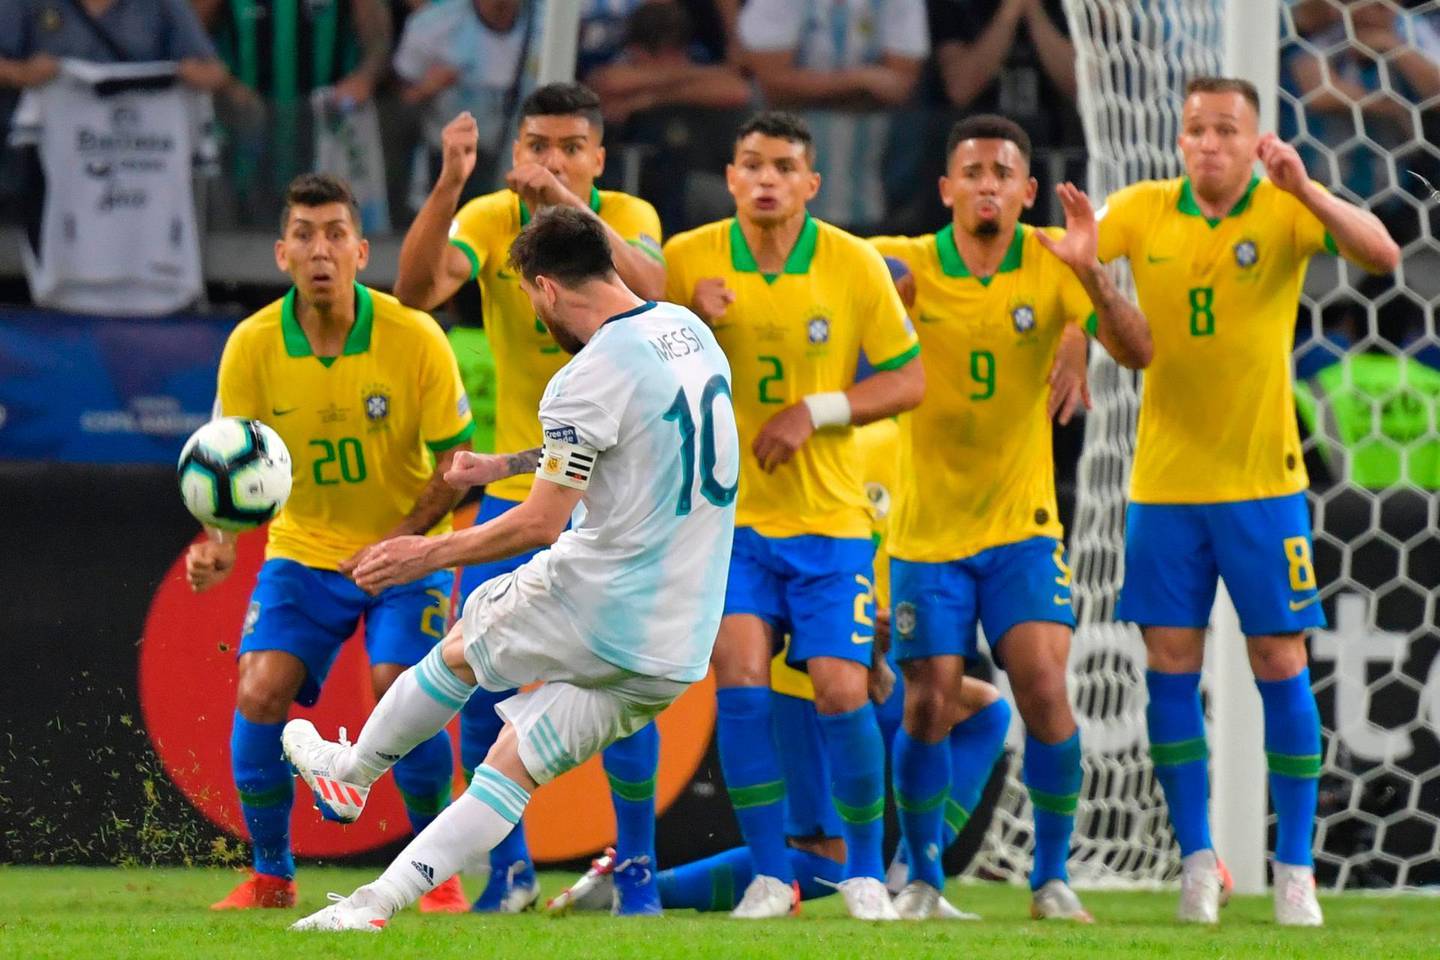 TOPSHOT - Argentina's Lionel Messi takes a free-kick against Brazil during their Copa America football tournament semi-final match at the Mineirao Stadium in Belo Horizonte, Brazil, on July 2, 2019. / AFP / Luis ACOSTA
